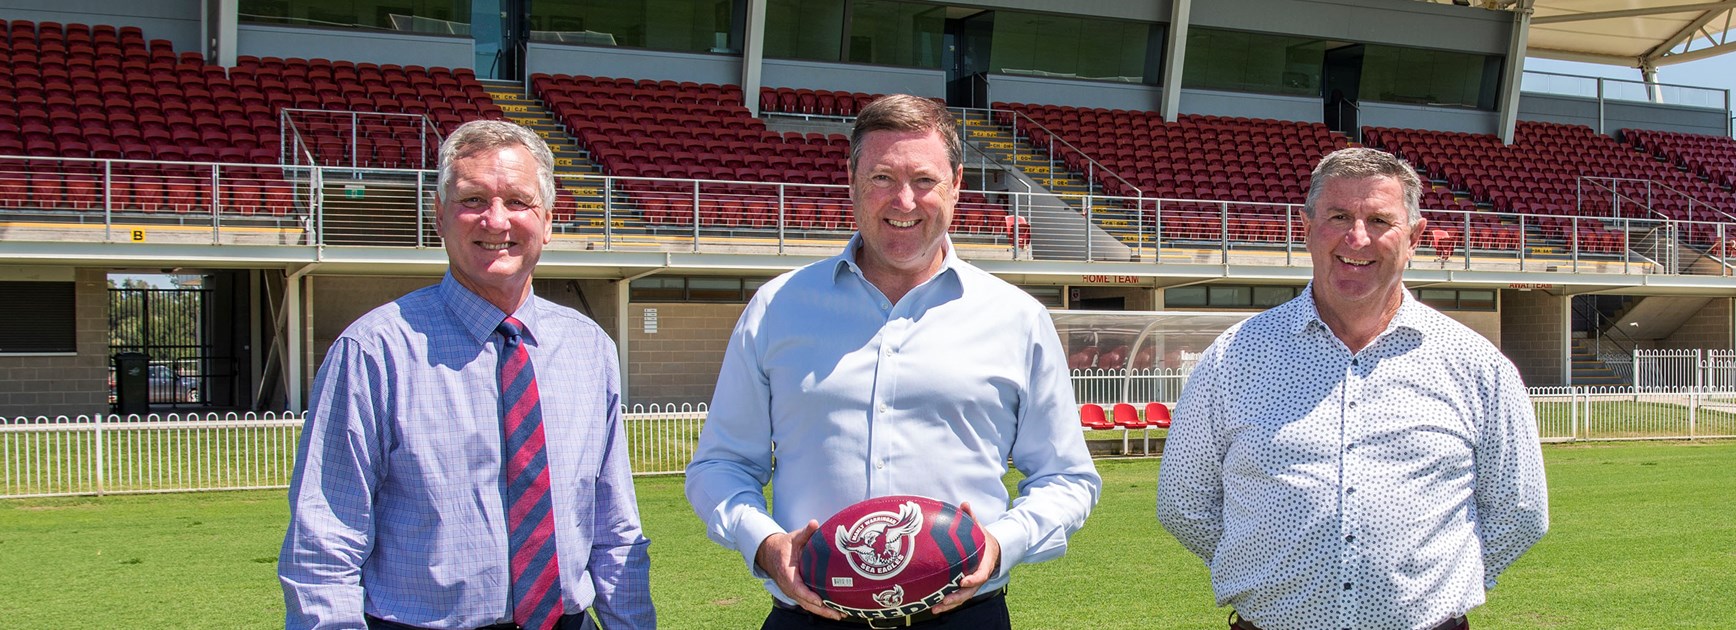 From Manly to Mudgee...(l-r) Mid-Western Regional Council General Manager Brad Cam, Sea Eagles CEO Stephen Humphreys, and Mid-Western Regional Council Mayor Des Kennedy, at Glen Willow Sports Complex.